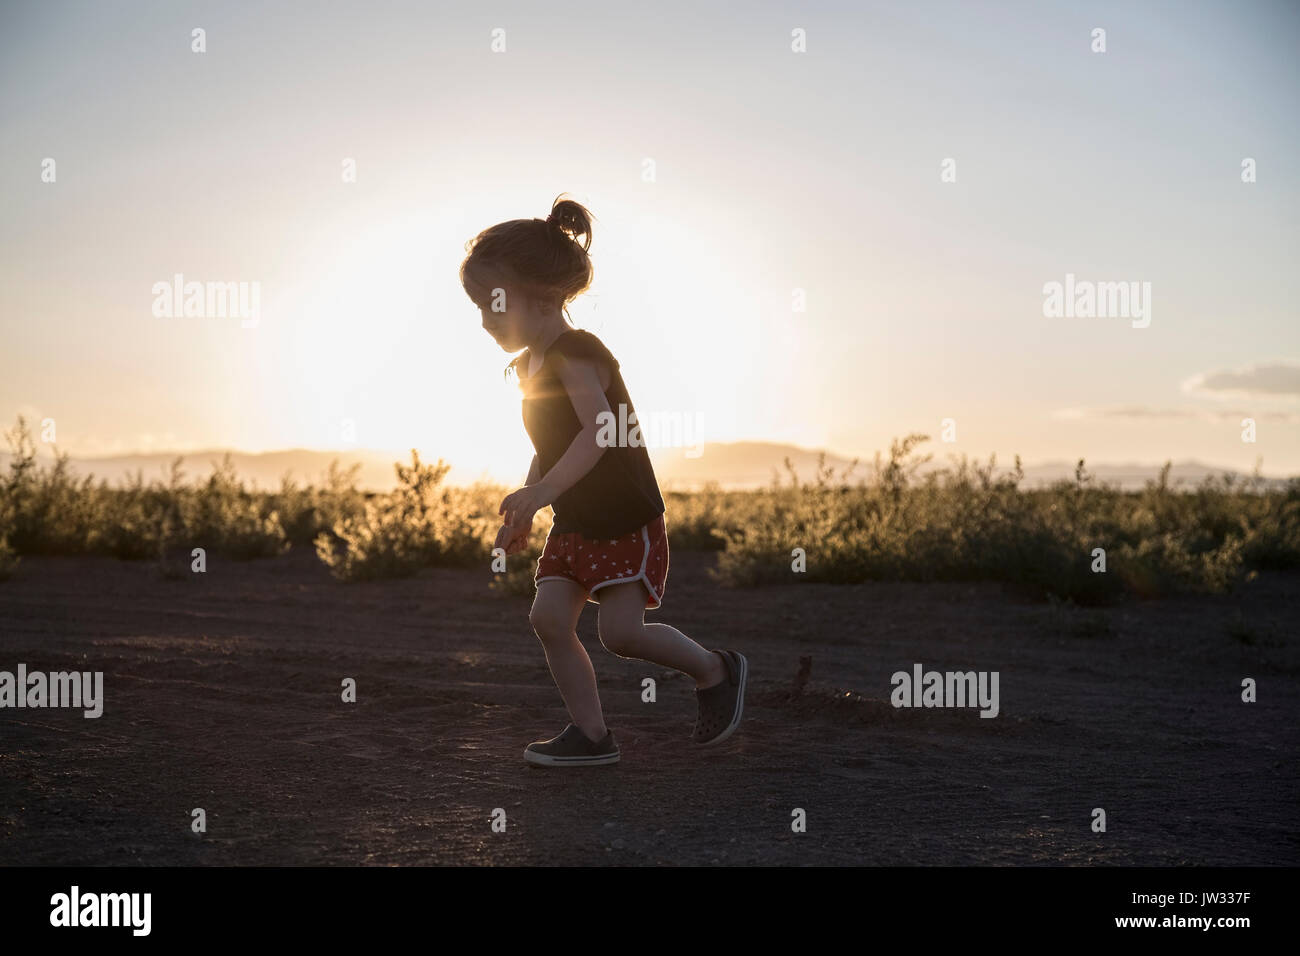 USA, Colorado, Little girl (4-5) running on dirt road at sunset Stock Photo